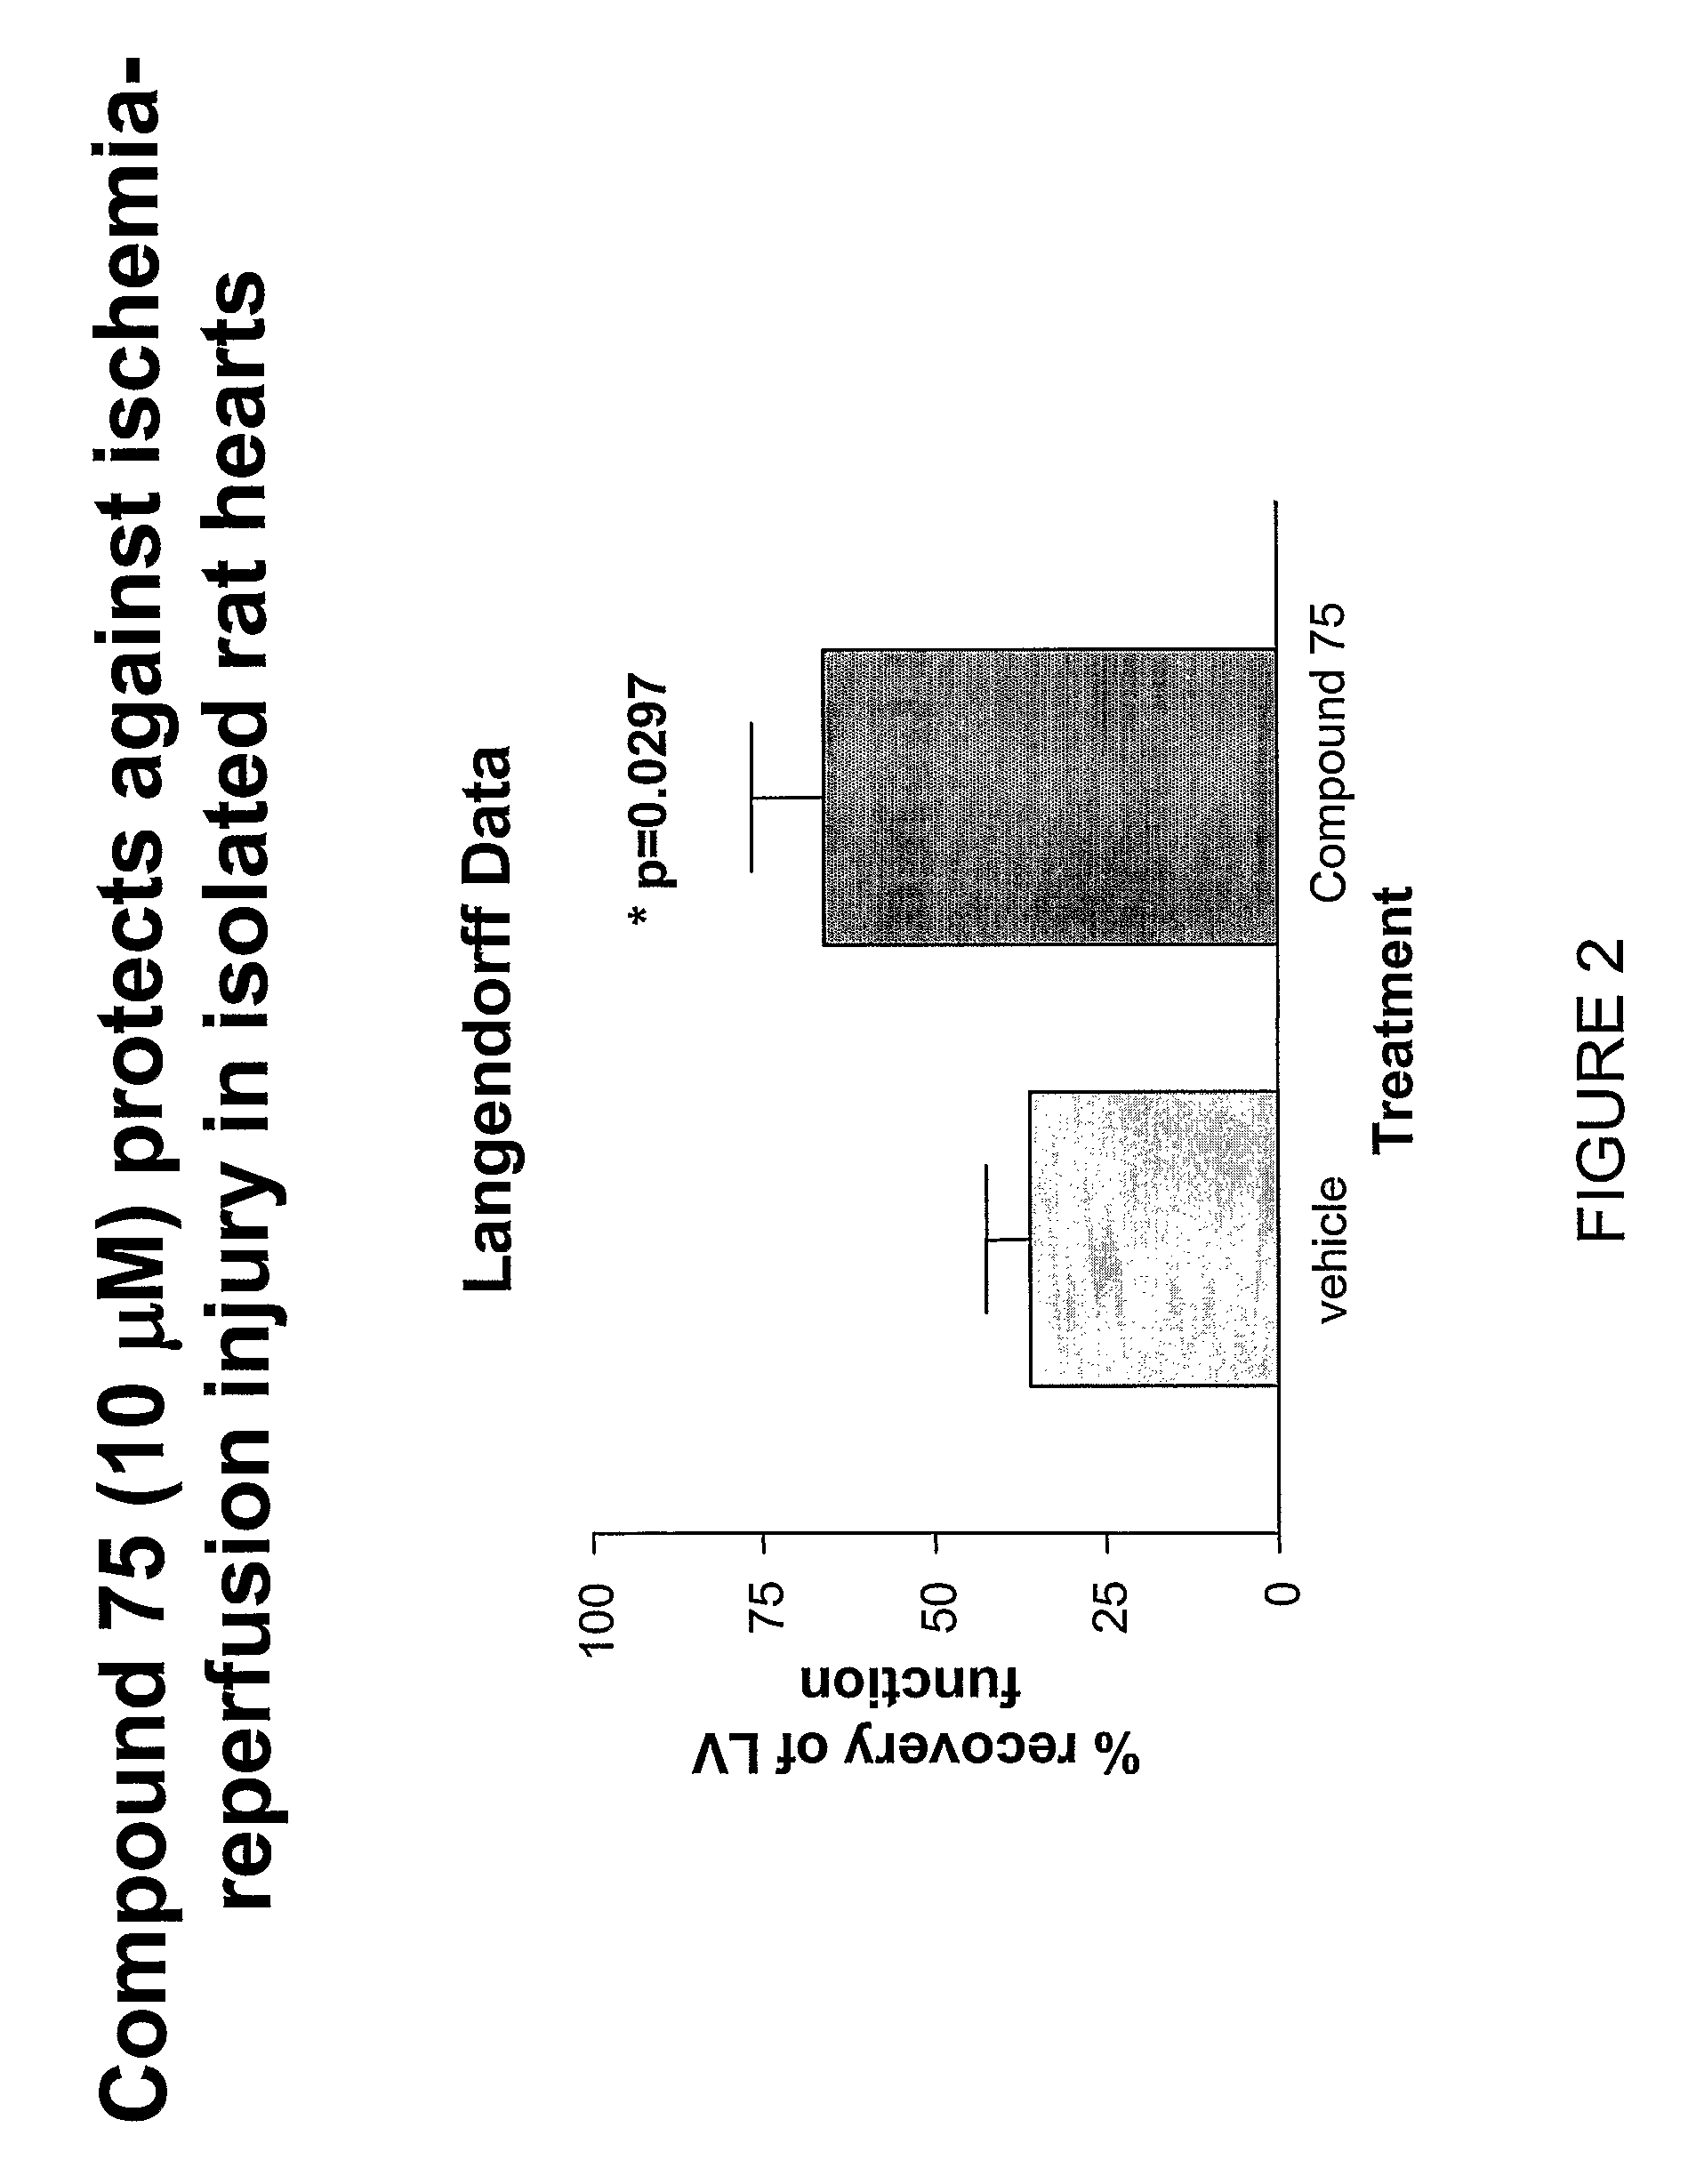 Novel Spiroindoline or Spiroisoquinoline Compounds, Methods of Use and Compositions Thereof